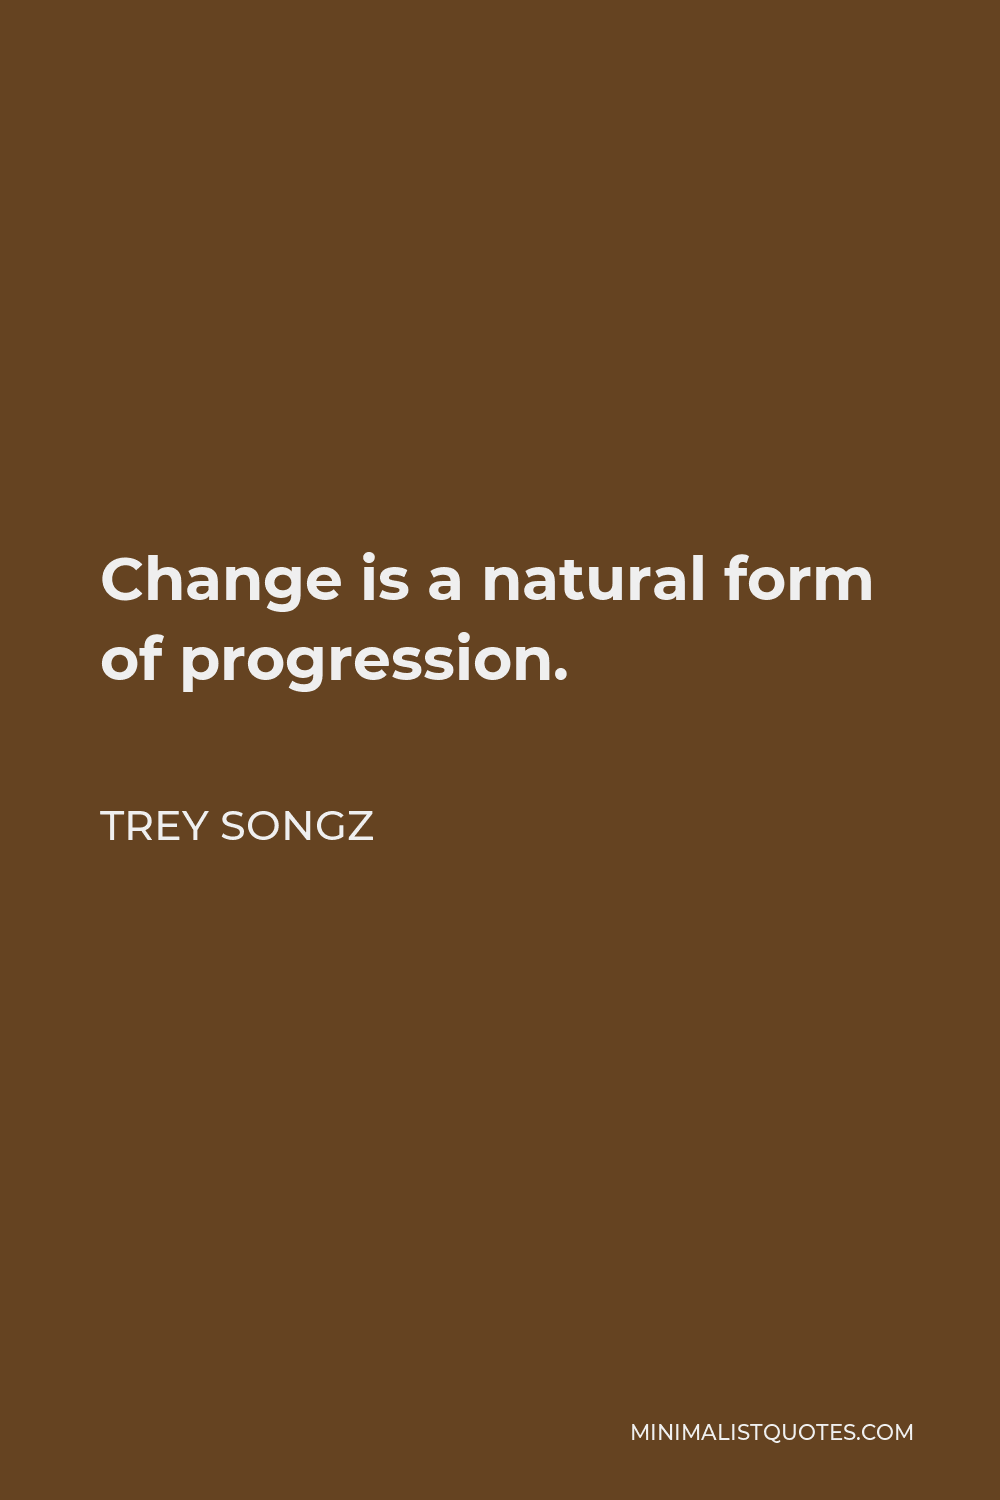 Trey Songz Quote - Change is a natural form of progression.